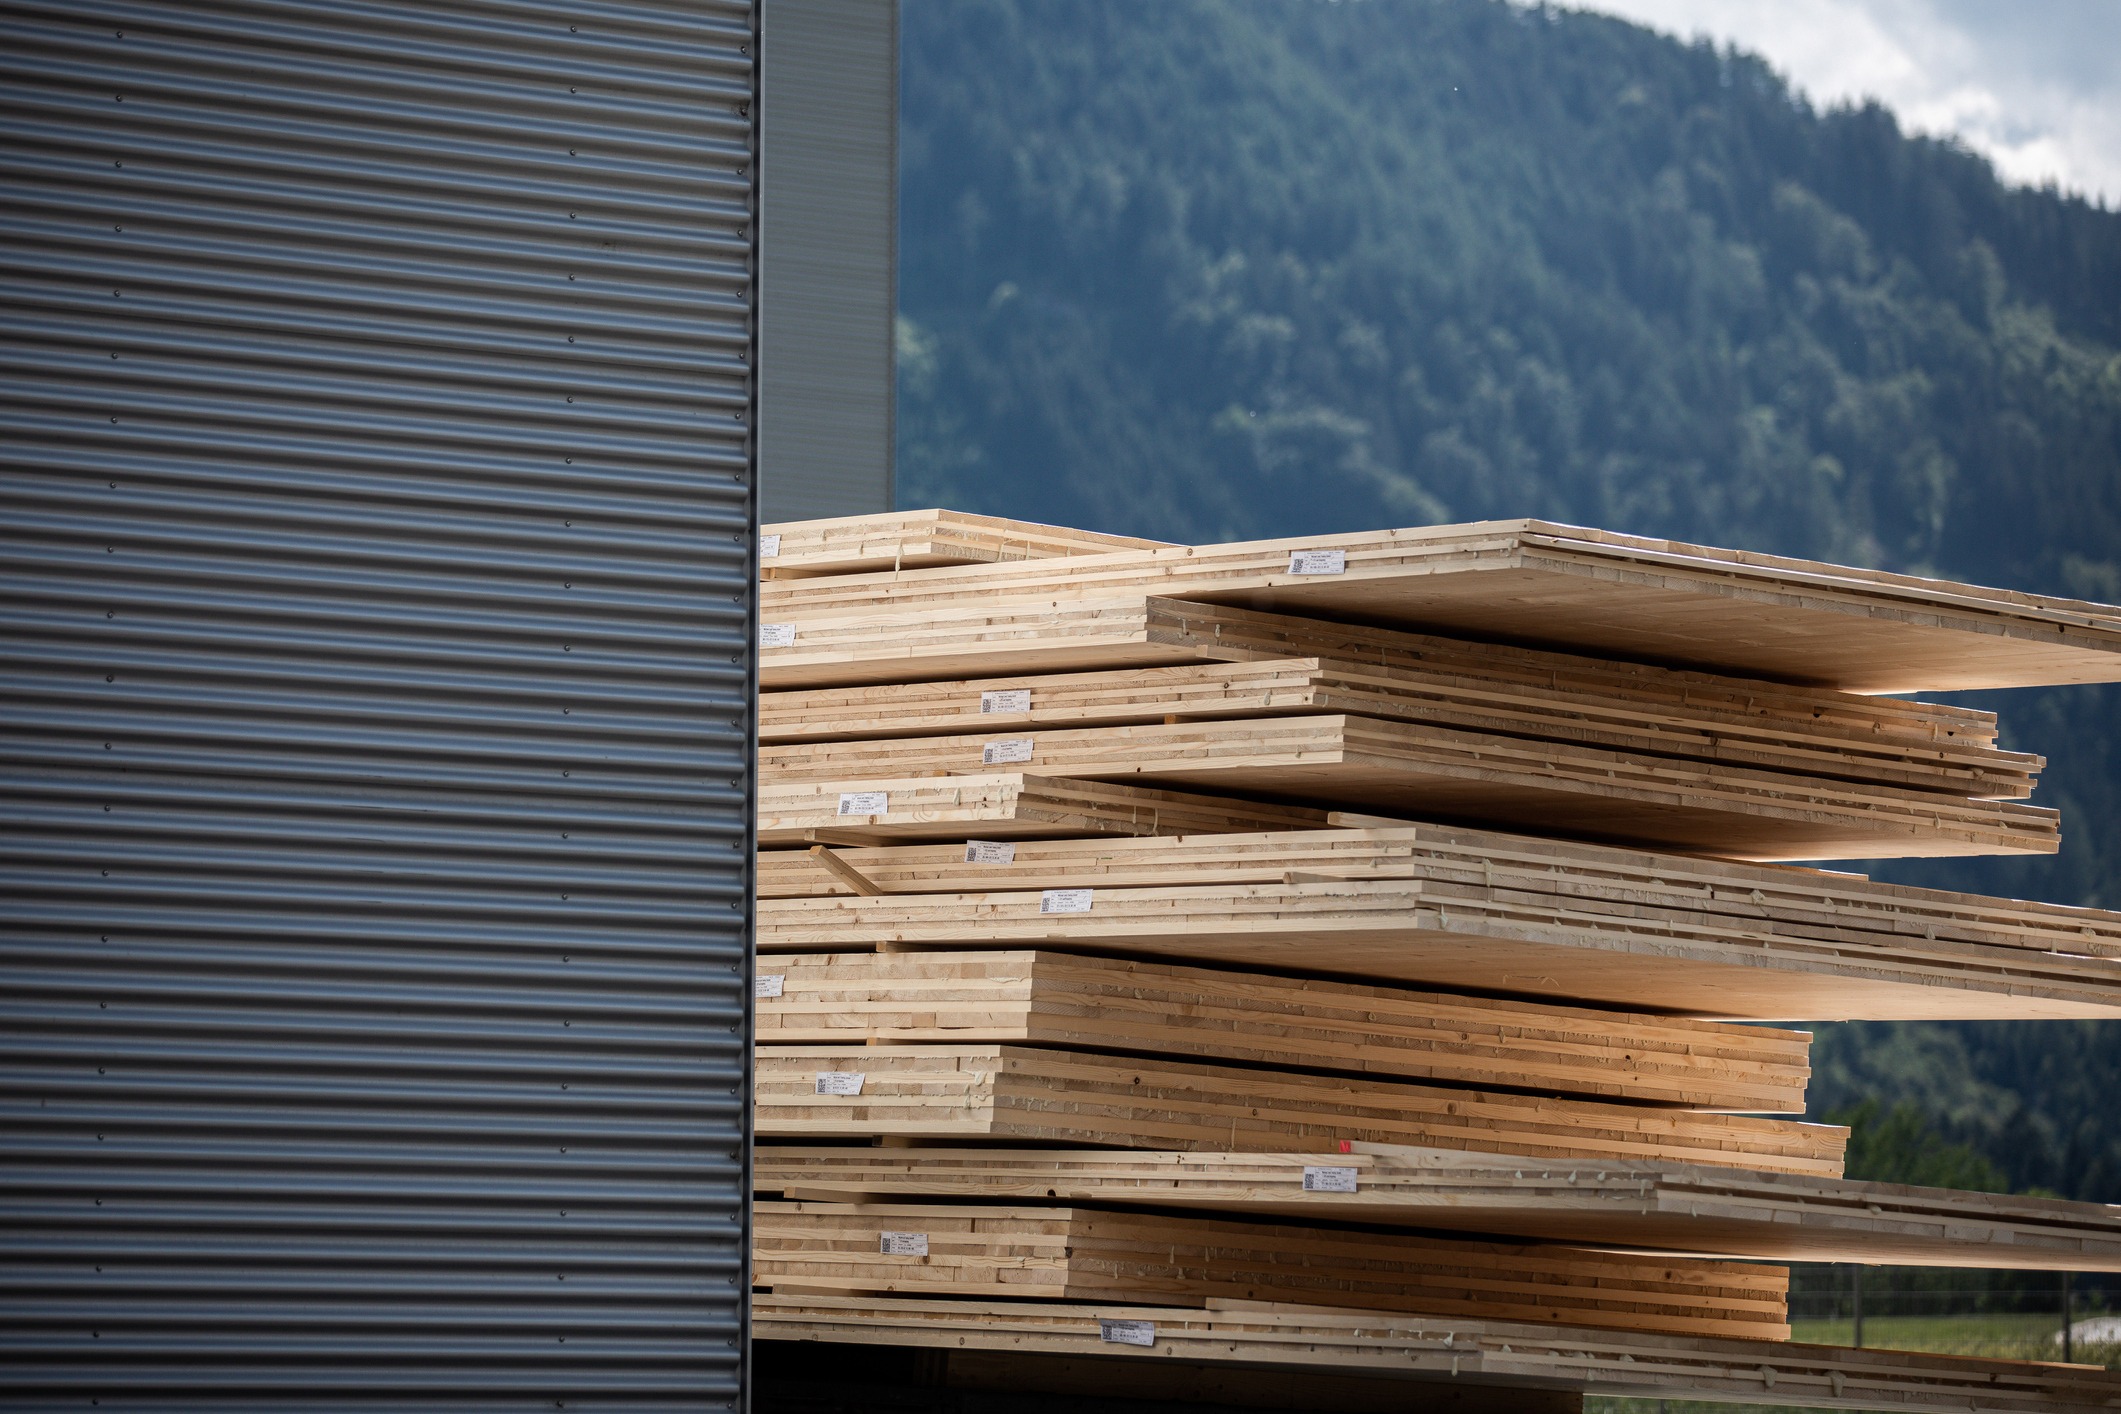 WHAT IS MASS TIMBER?